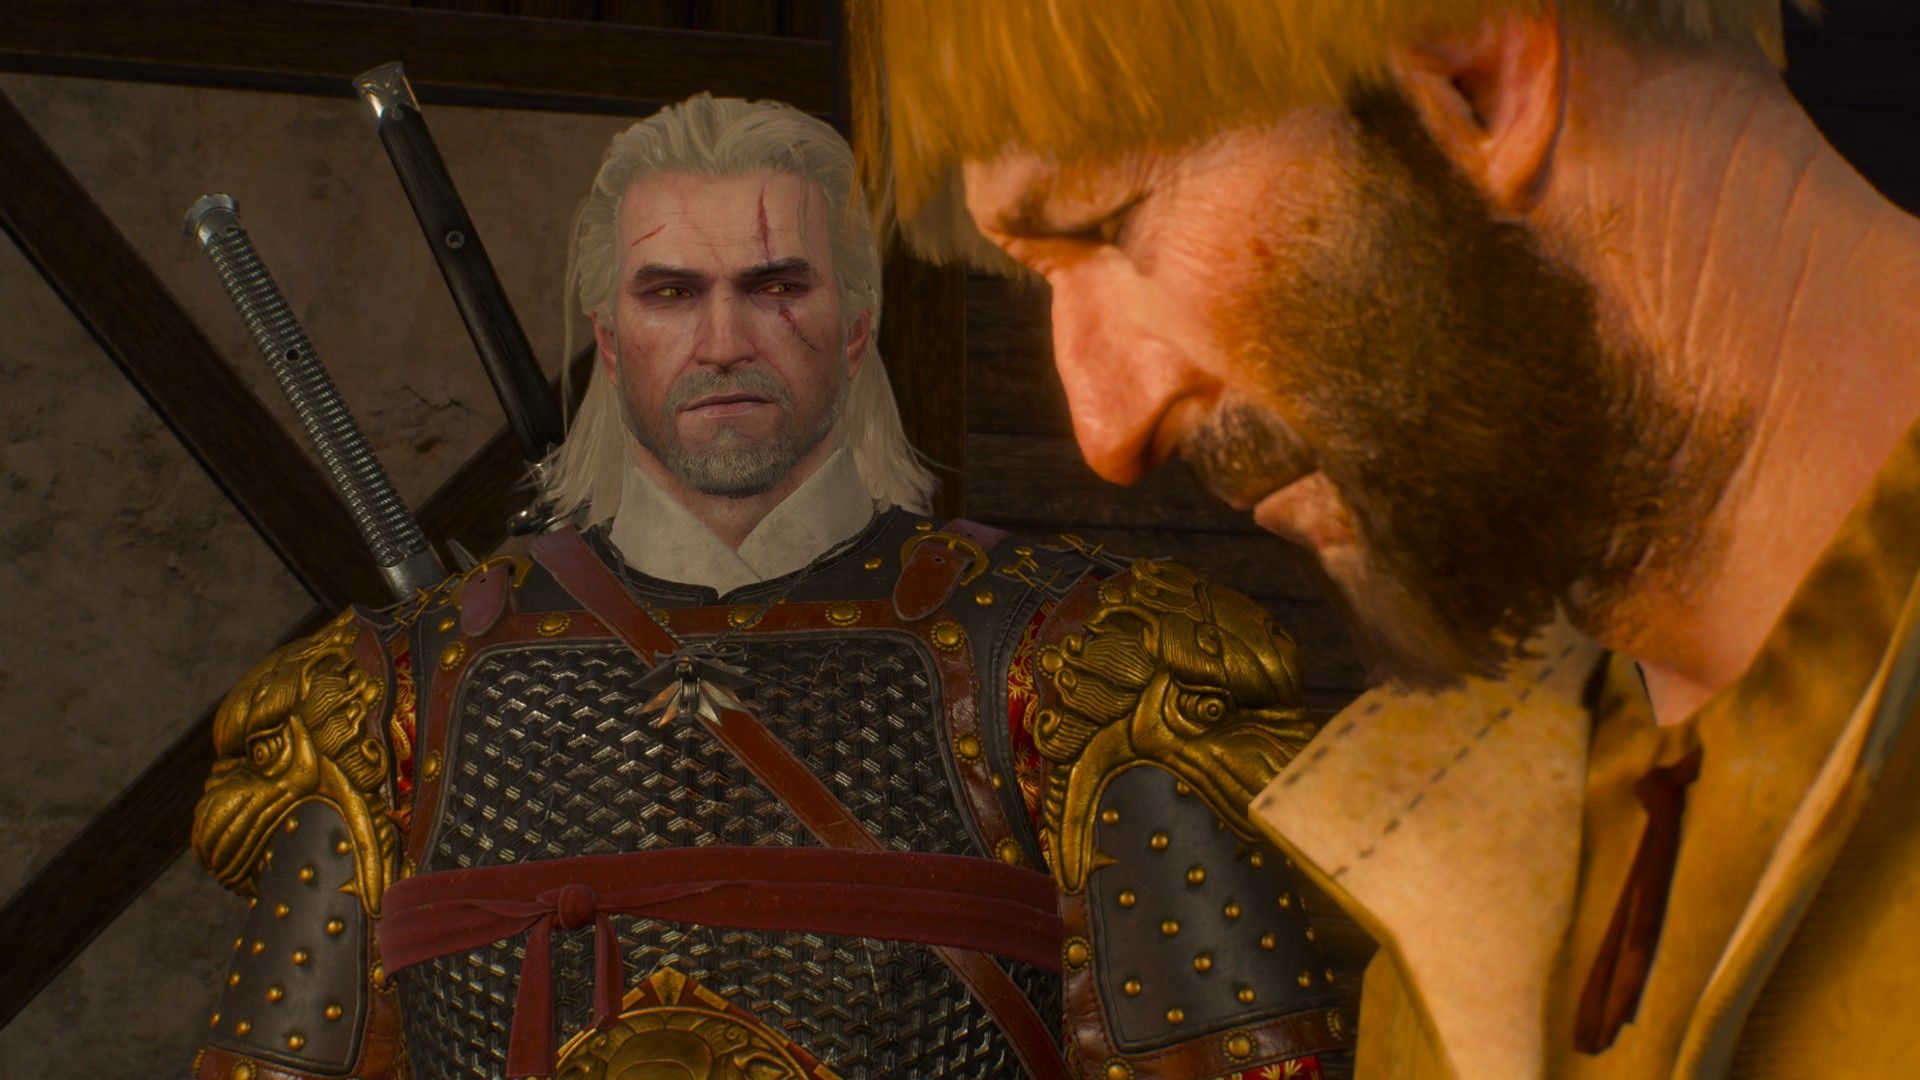 Geralt shoots a bearded man with a bowl cut a well-used look as the man hangs his head in shame.